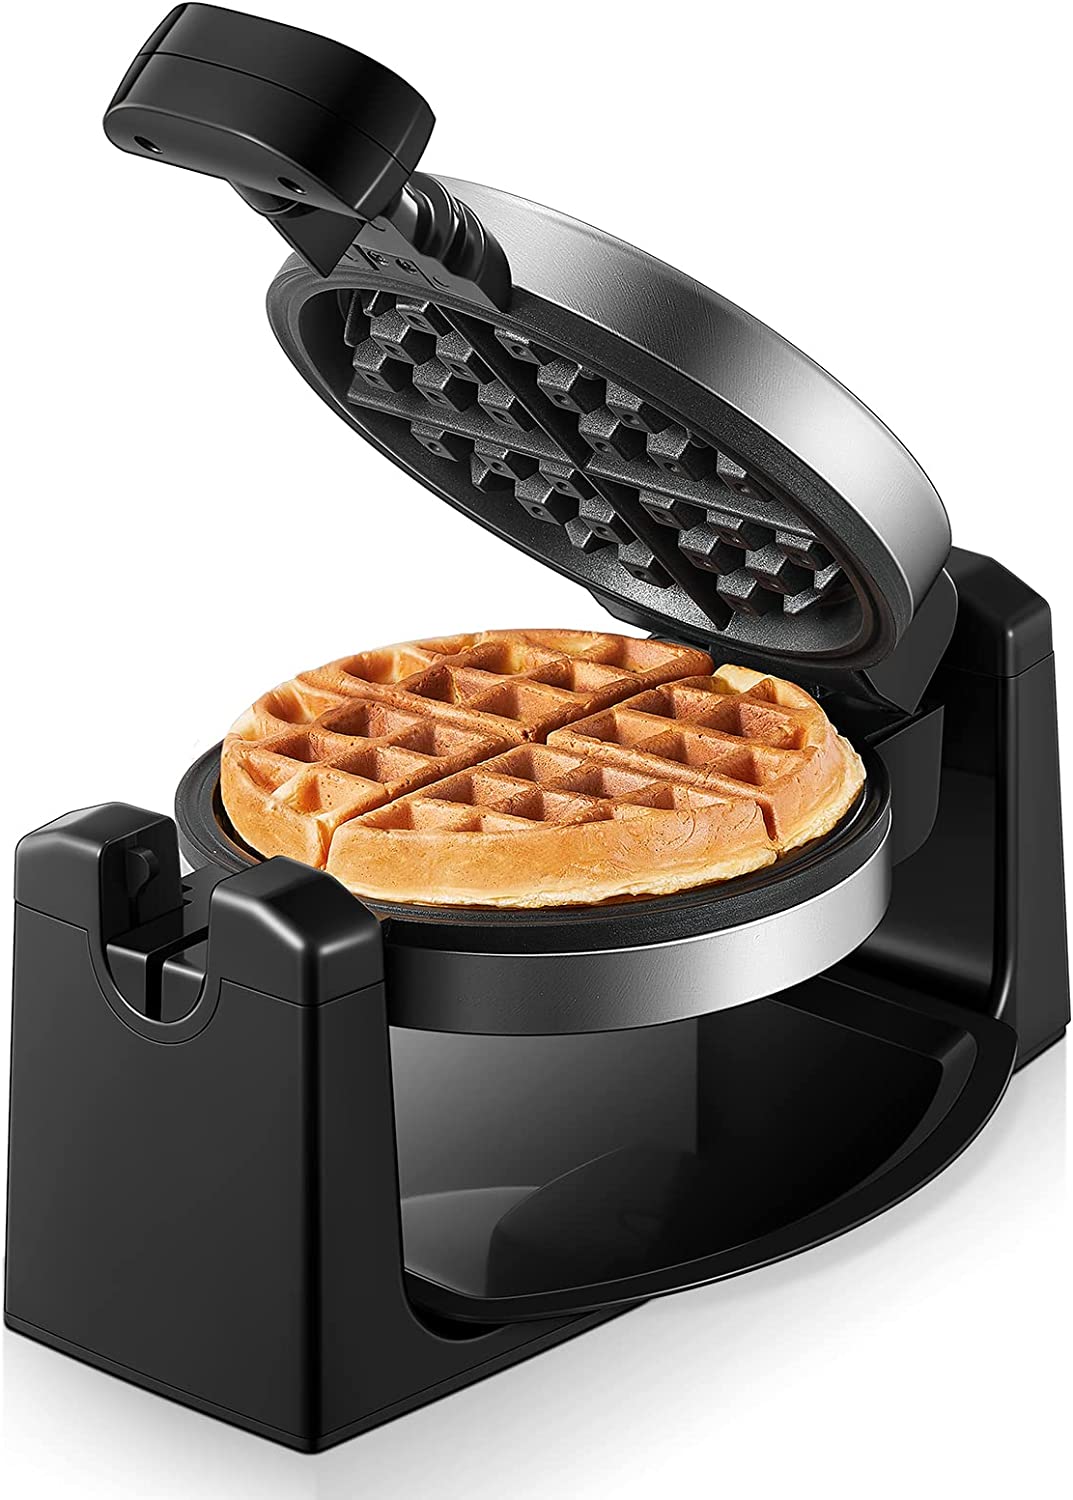 Flip Belgian Waffle Maker, 180° Rotating Waffle Iron with Easy to Clean Non-Stick Surfaces, Classic 1" Thick Waffles, Included Recipe, Removable Drip Tray, Browning Control, 1100W, Stainless Steel